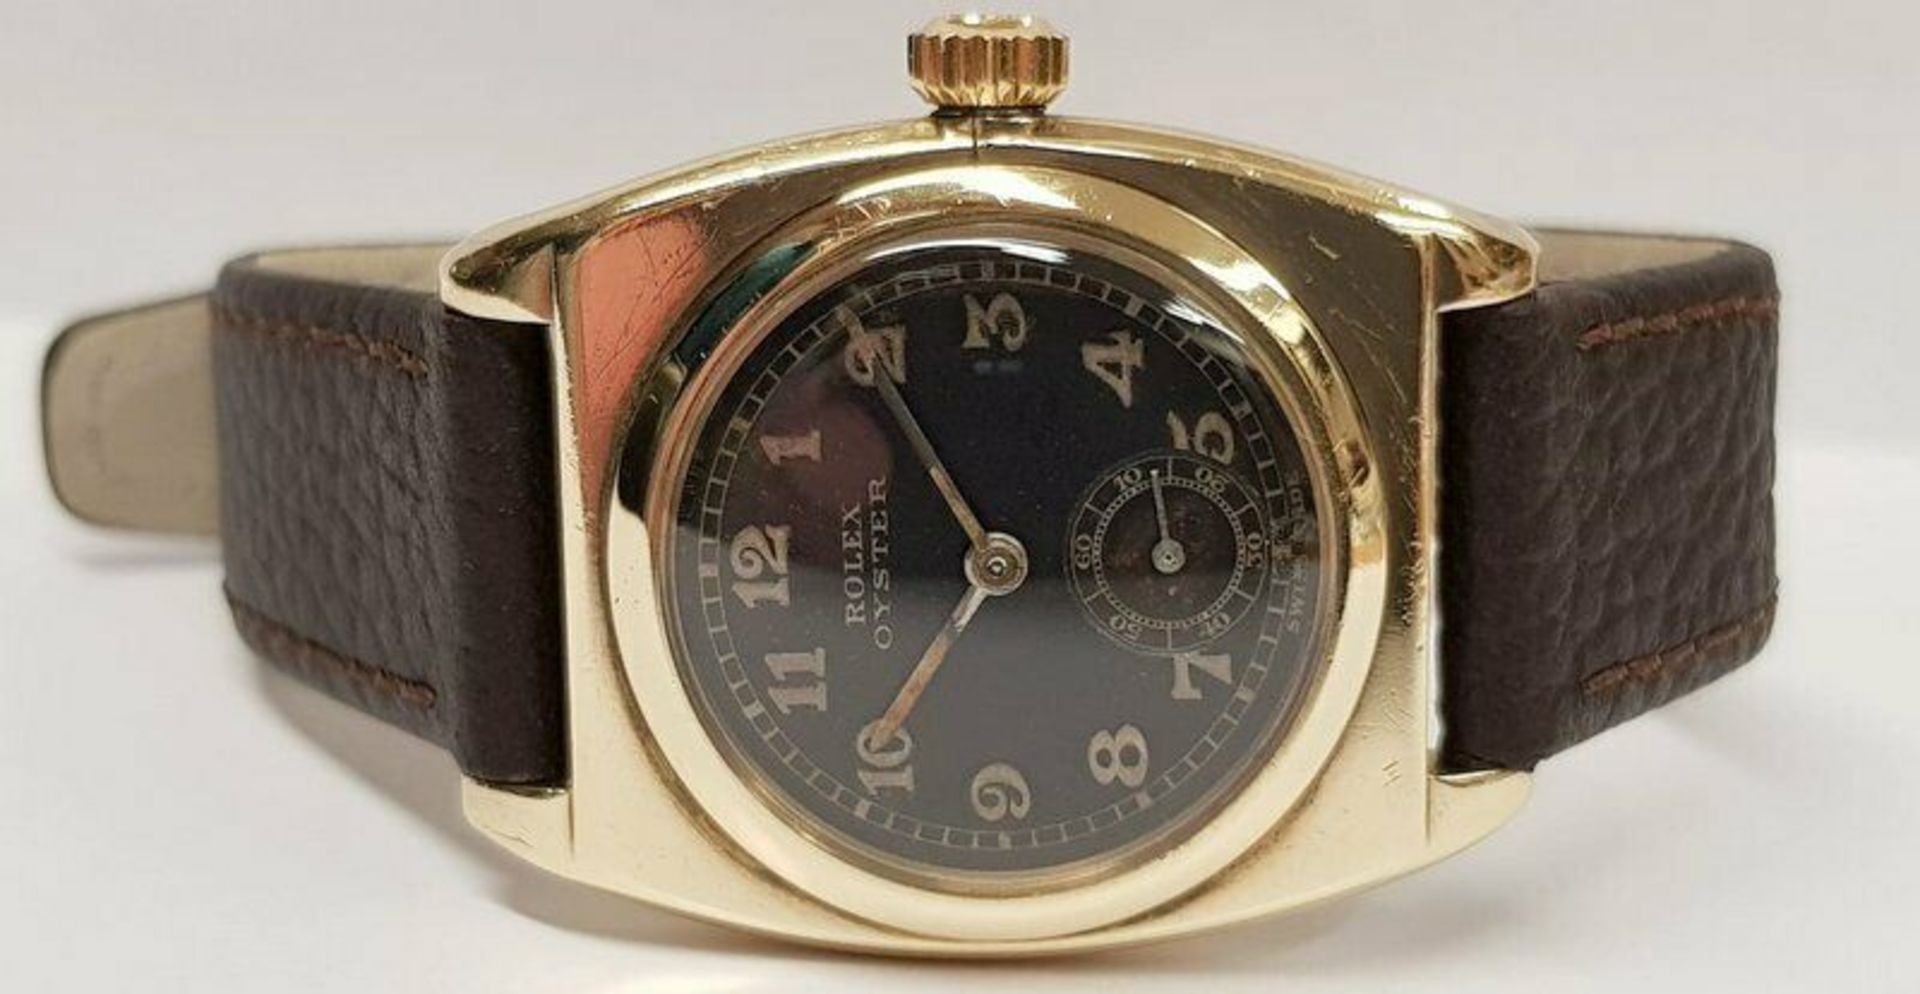 Rare Black Dial Rolex Oyster Viceroy 9ct Gold 1933 Chronometer - Image 11 of 11